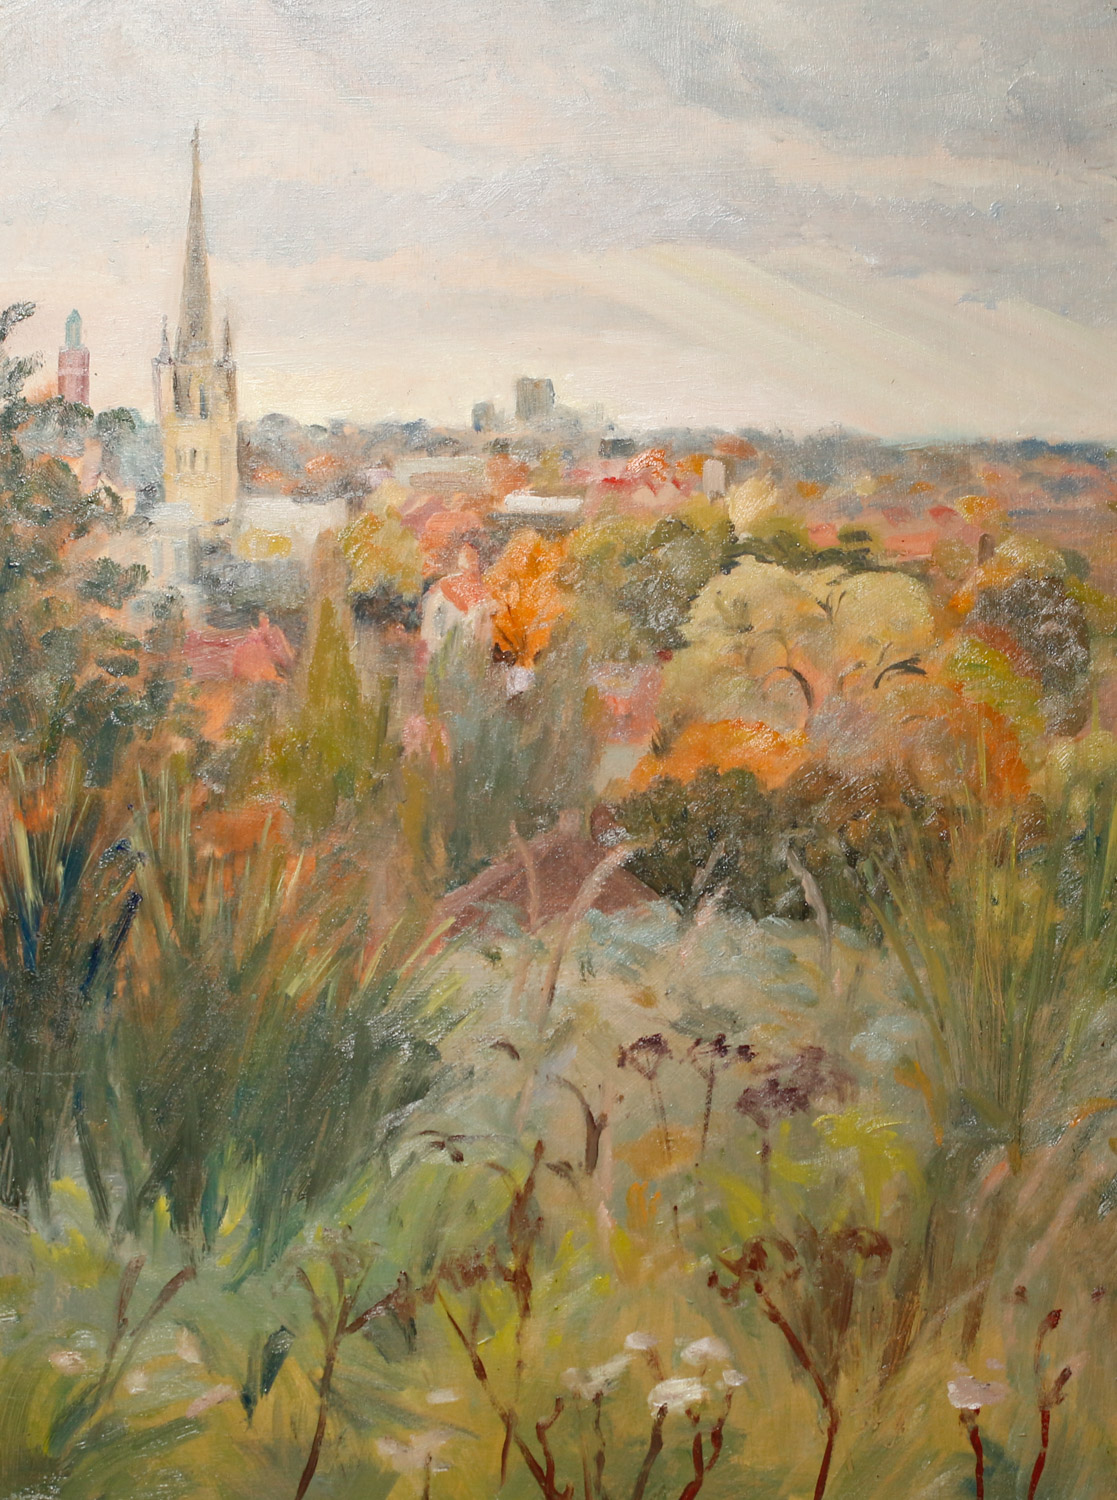 Artist Mary MacCarthy - The Most Beautiful Tree, Mousehold Heath, £400 12x16 Oil on Board at Paint Out Norwich 2015